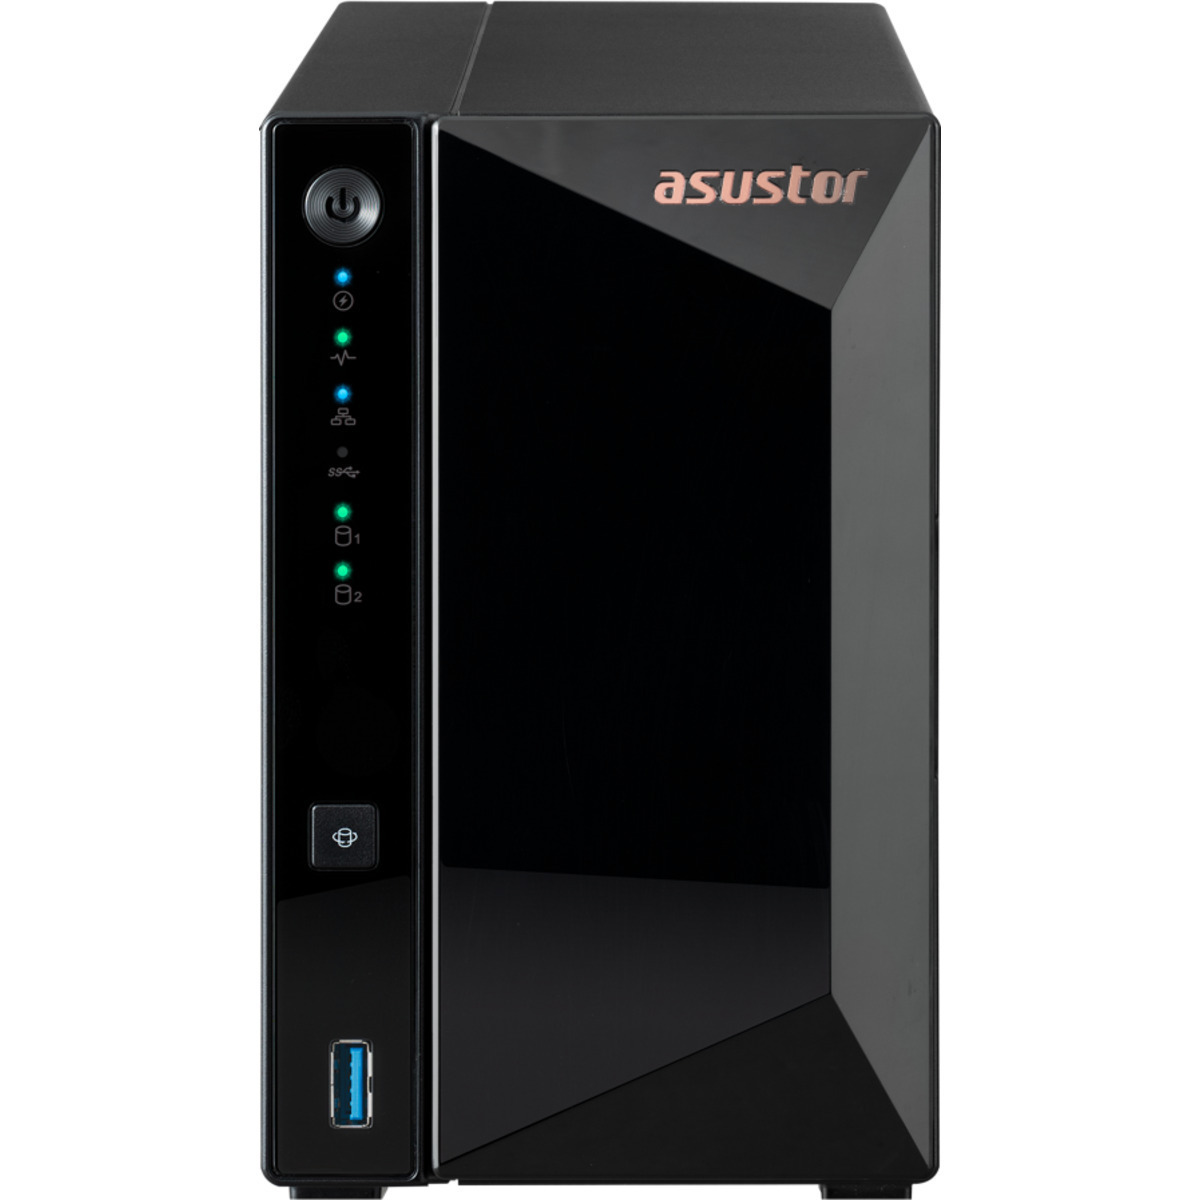 ASUSTOR DRIVESTOR 2 Pro Gen2 AS3302T v2 2tb 2-Bay Desktop Personal / Basic Home / Small Office NAS - Network Attached Storage Device 2x1tb Crucial MX500 CT1000MX500SSD1 2.5 560/510MB/s SATA 6Gb/s SSD CONSUMER Class Drives Installed - Burn-In Tested - ON SALE DRIVESTOR 2 Pro Gen2 AS3302T v2